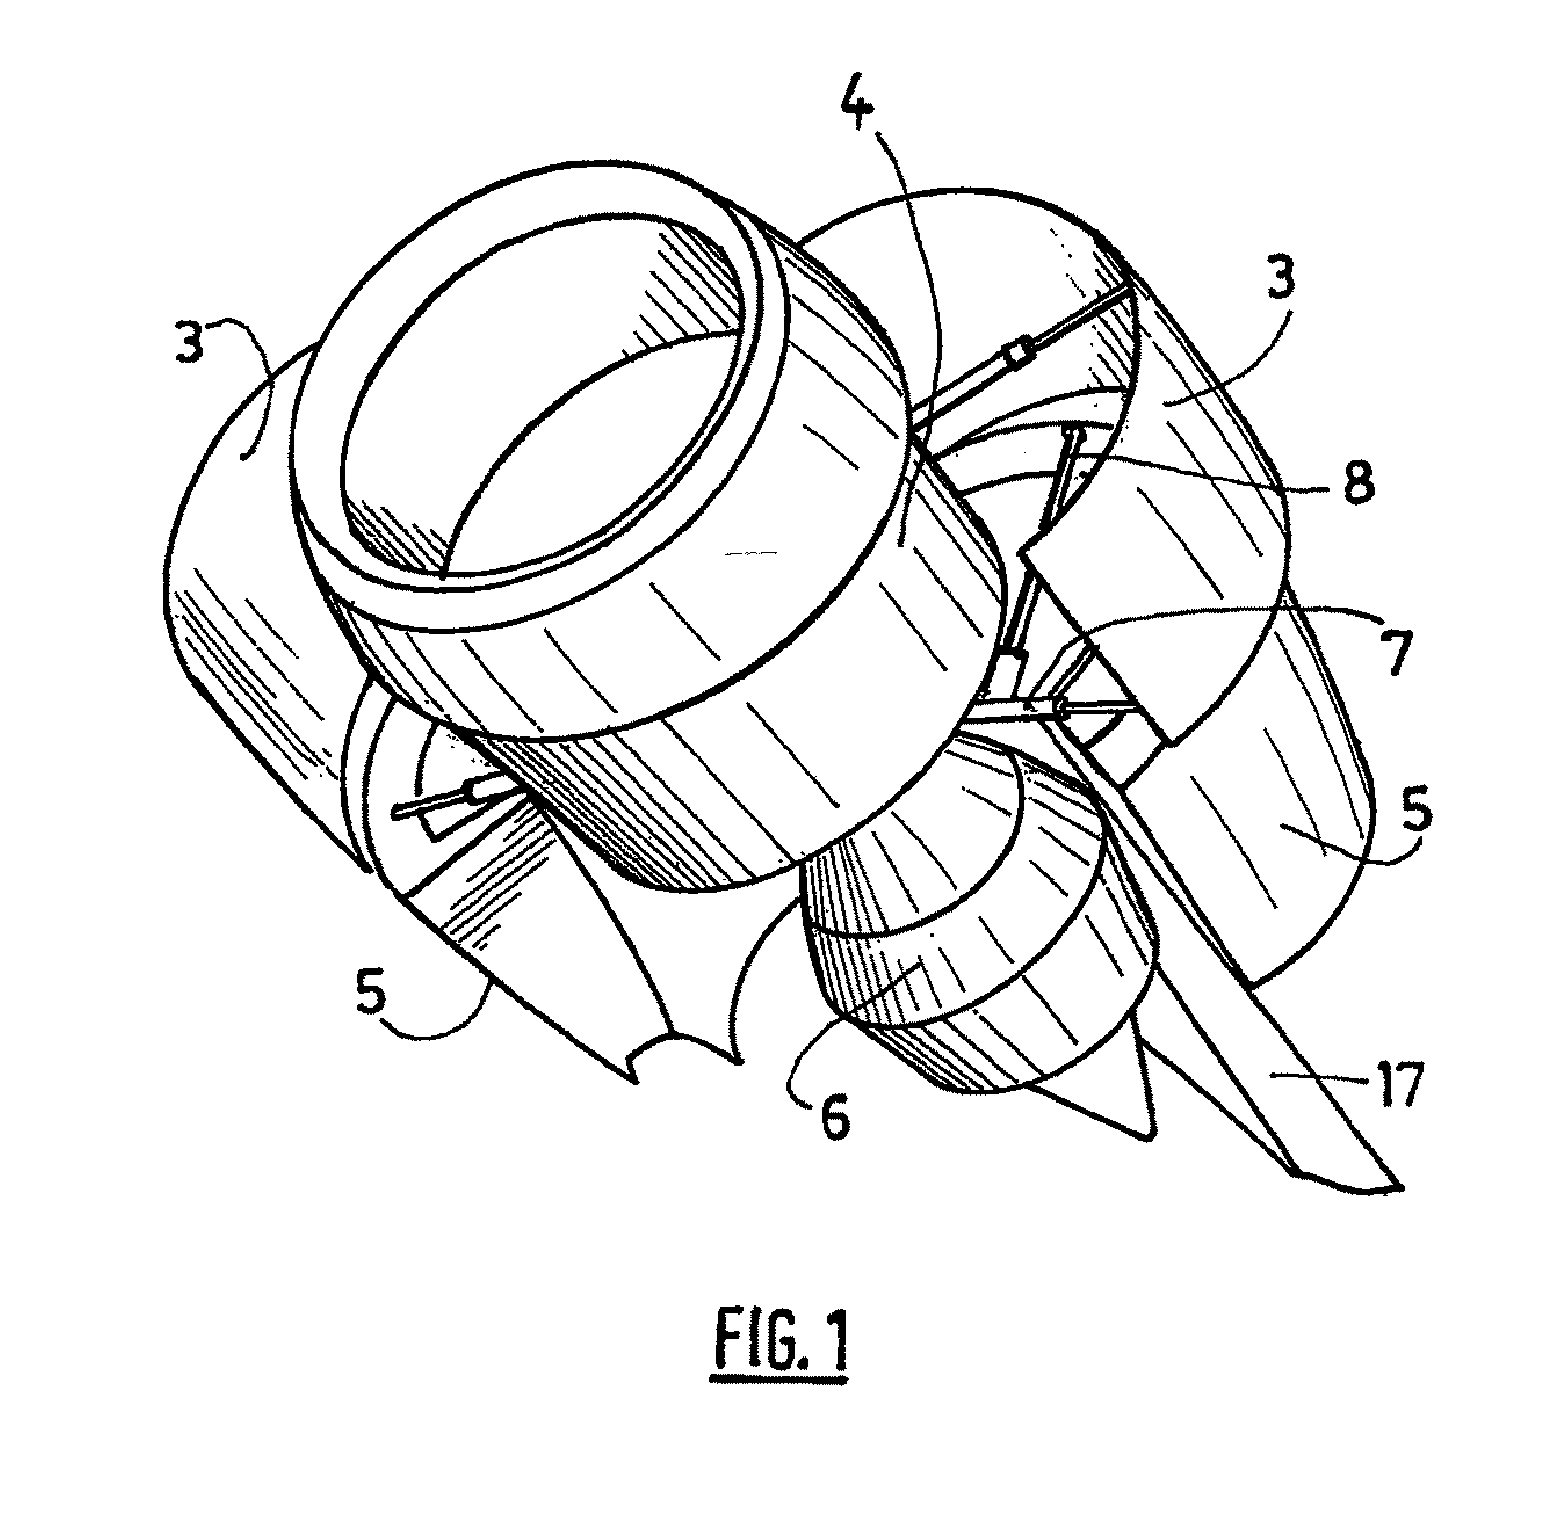 Device for controlling maintenance actuators for the cowlings of a turbojet engine nacelle